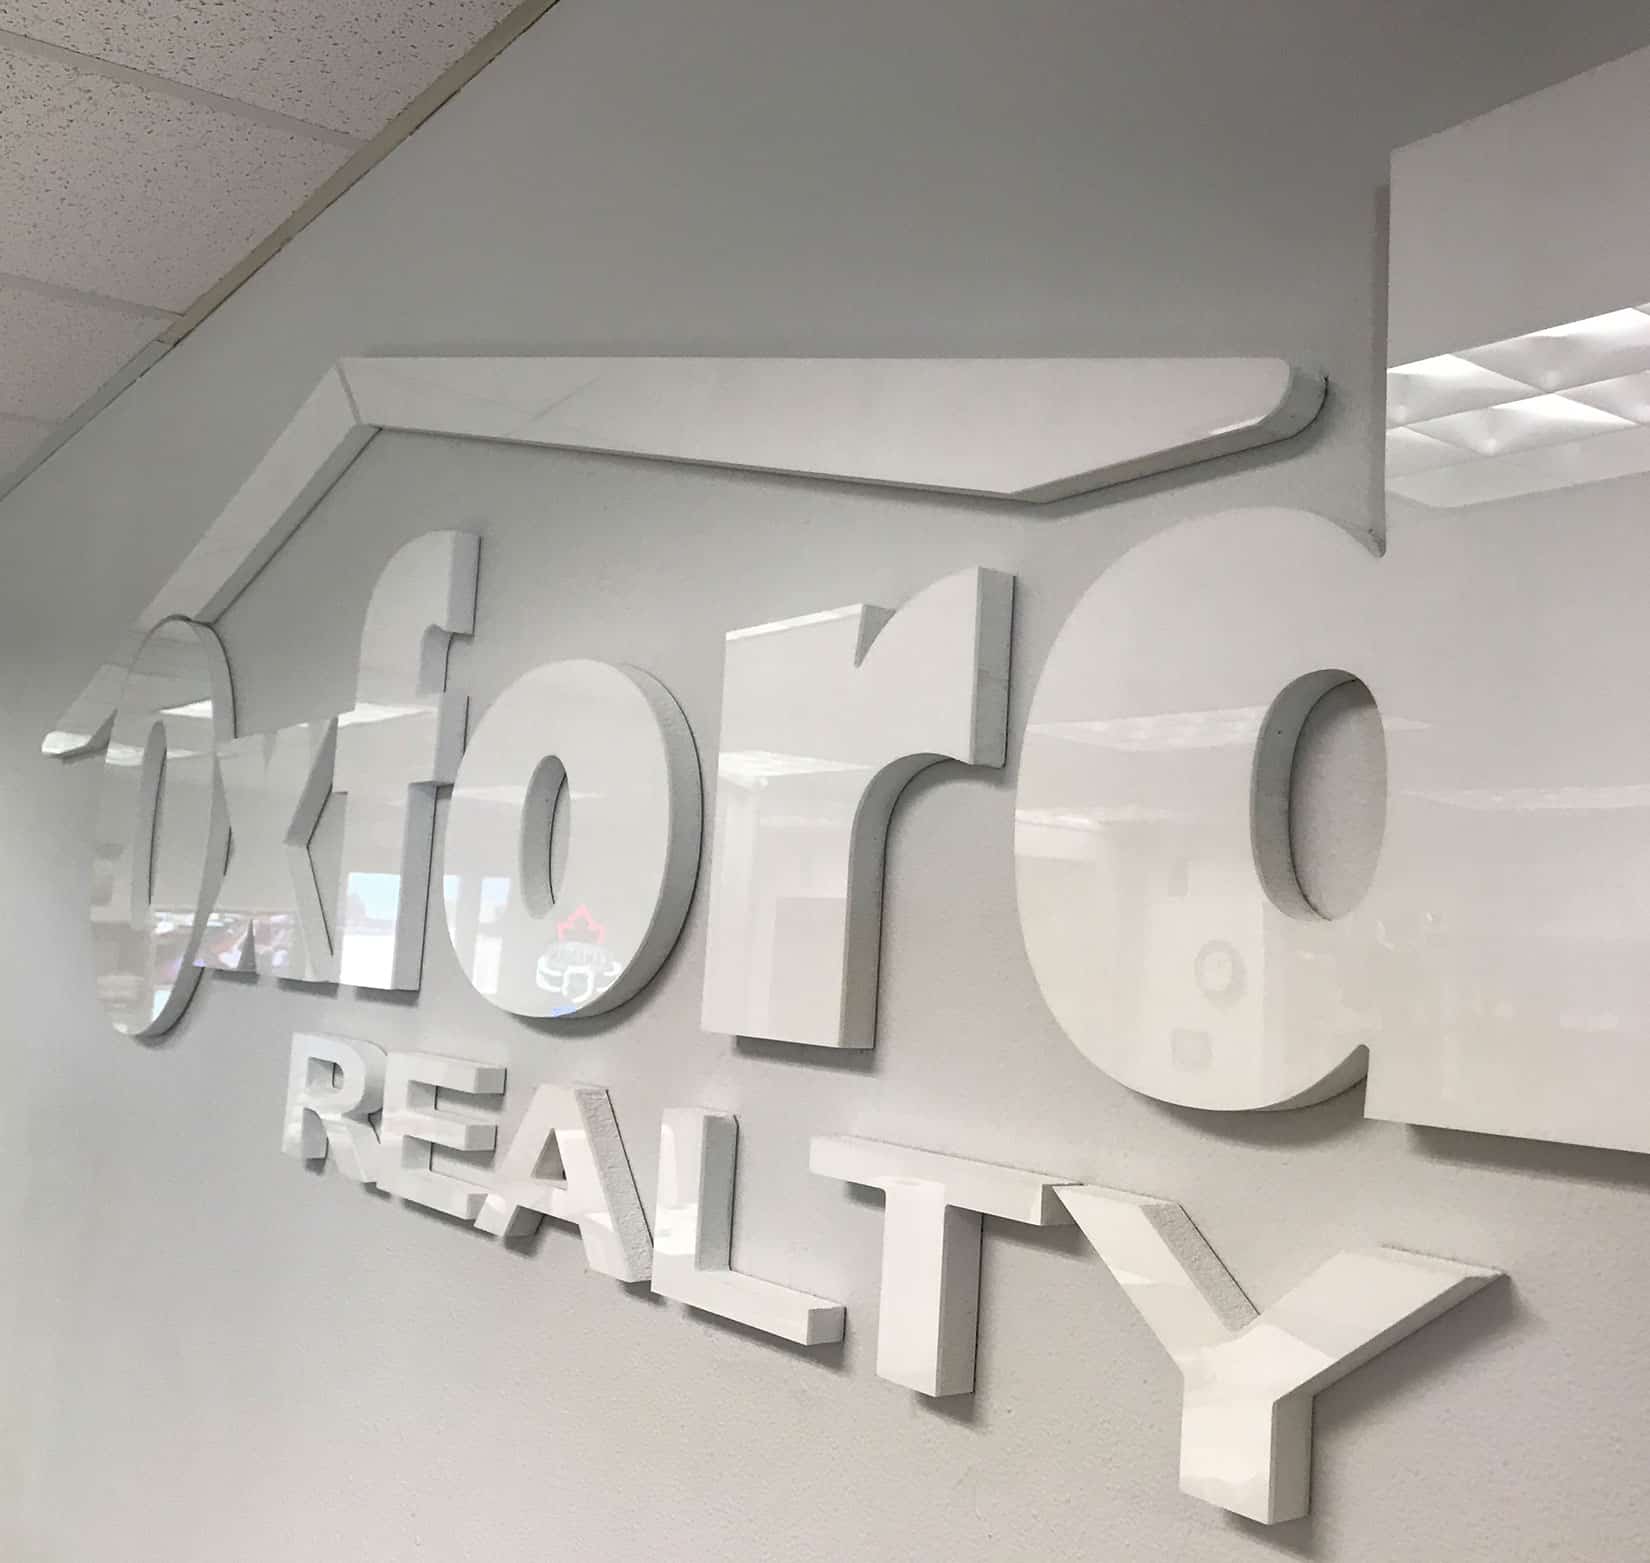 An interior white sign of Oxford Realty’s logo on a white wall